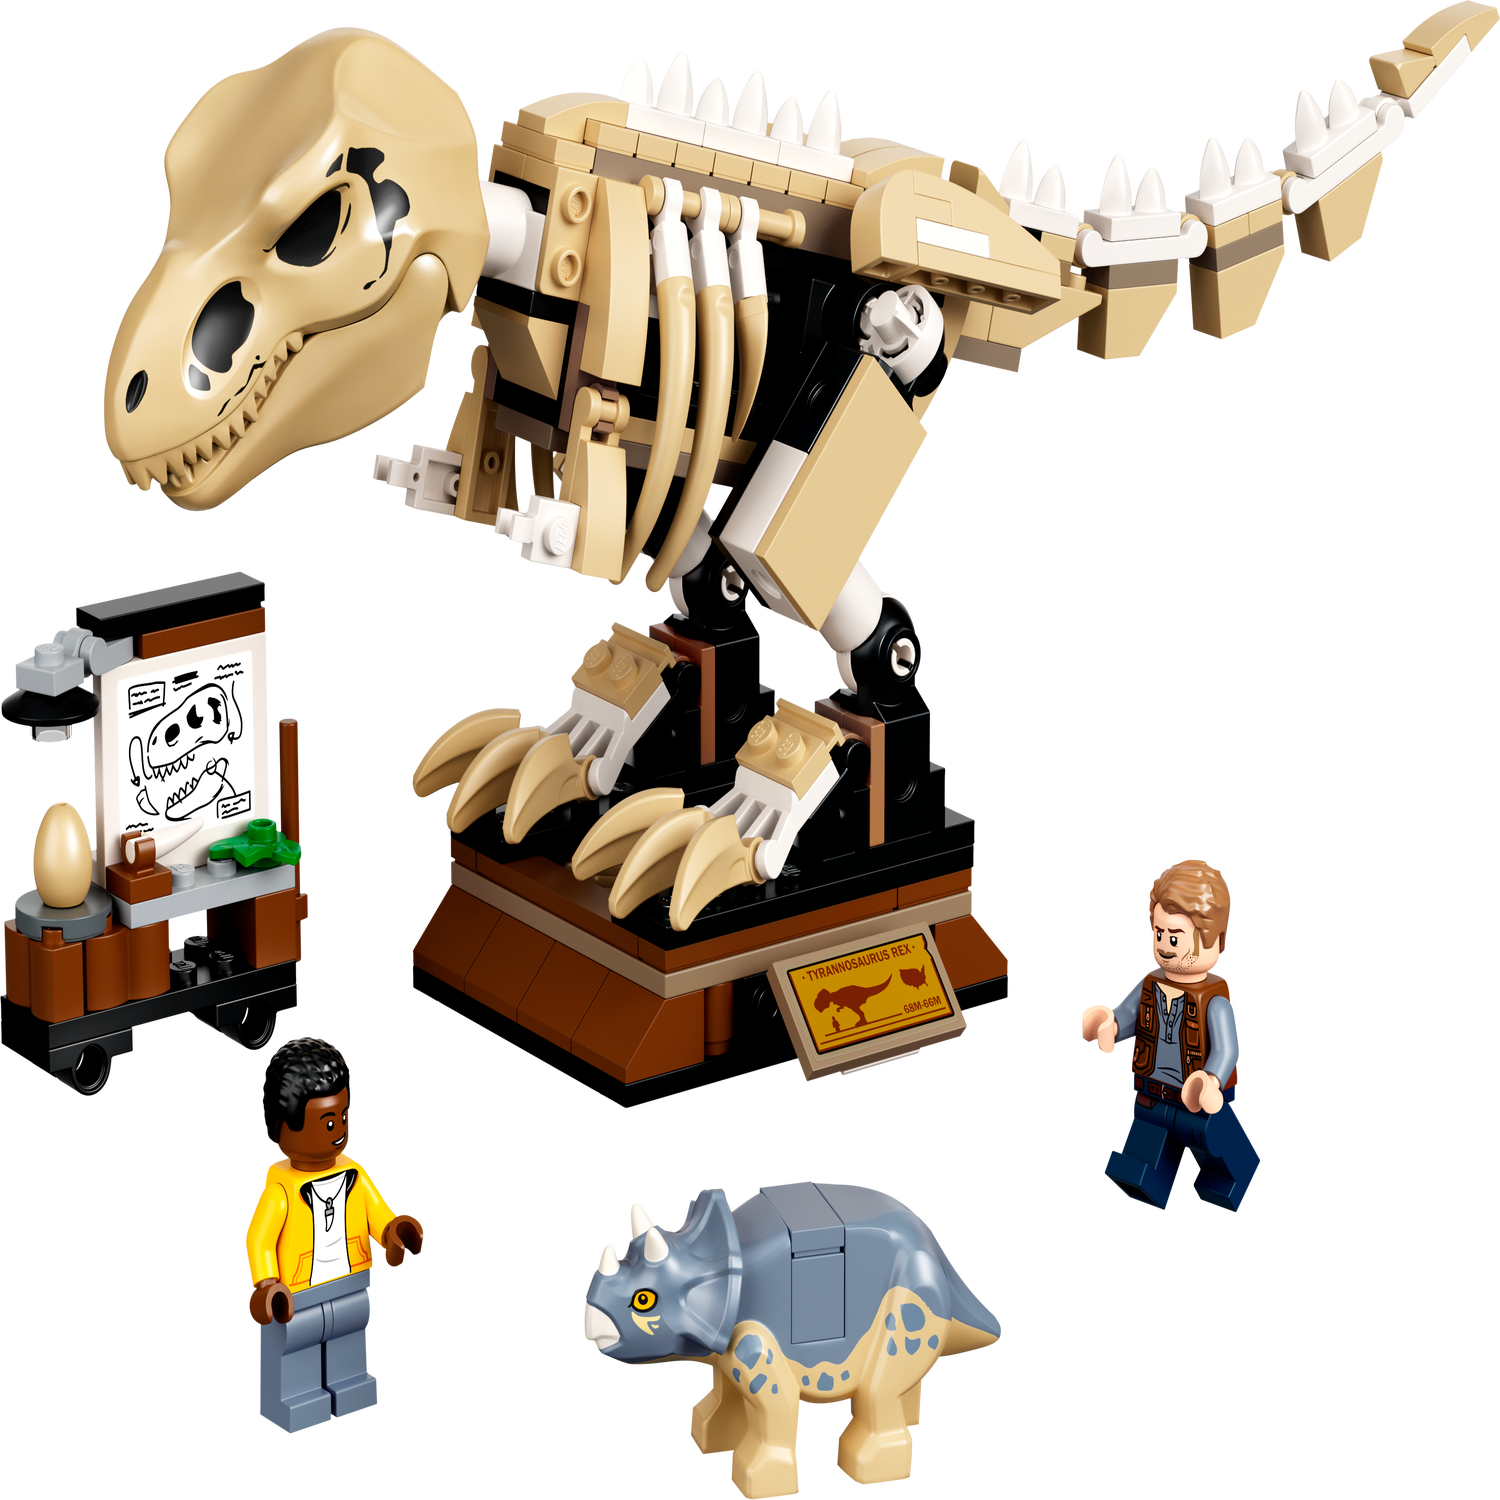 T. rex Dinosaur Fossil Exhibition 76940 | Jurassic World™ | Buy online at  the Official LEGO® Shop US